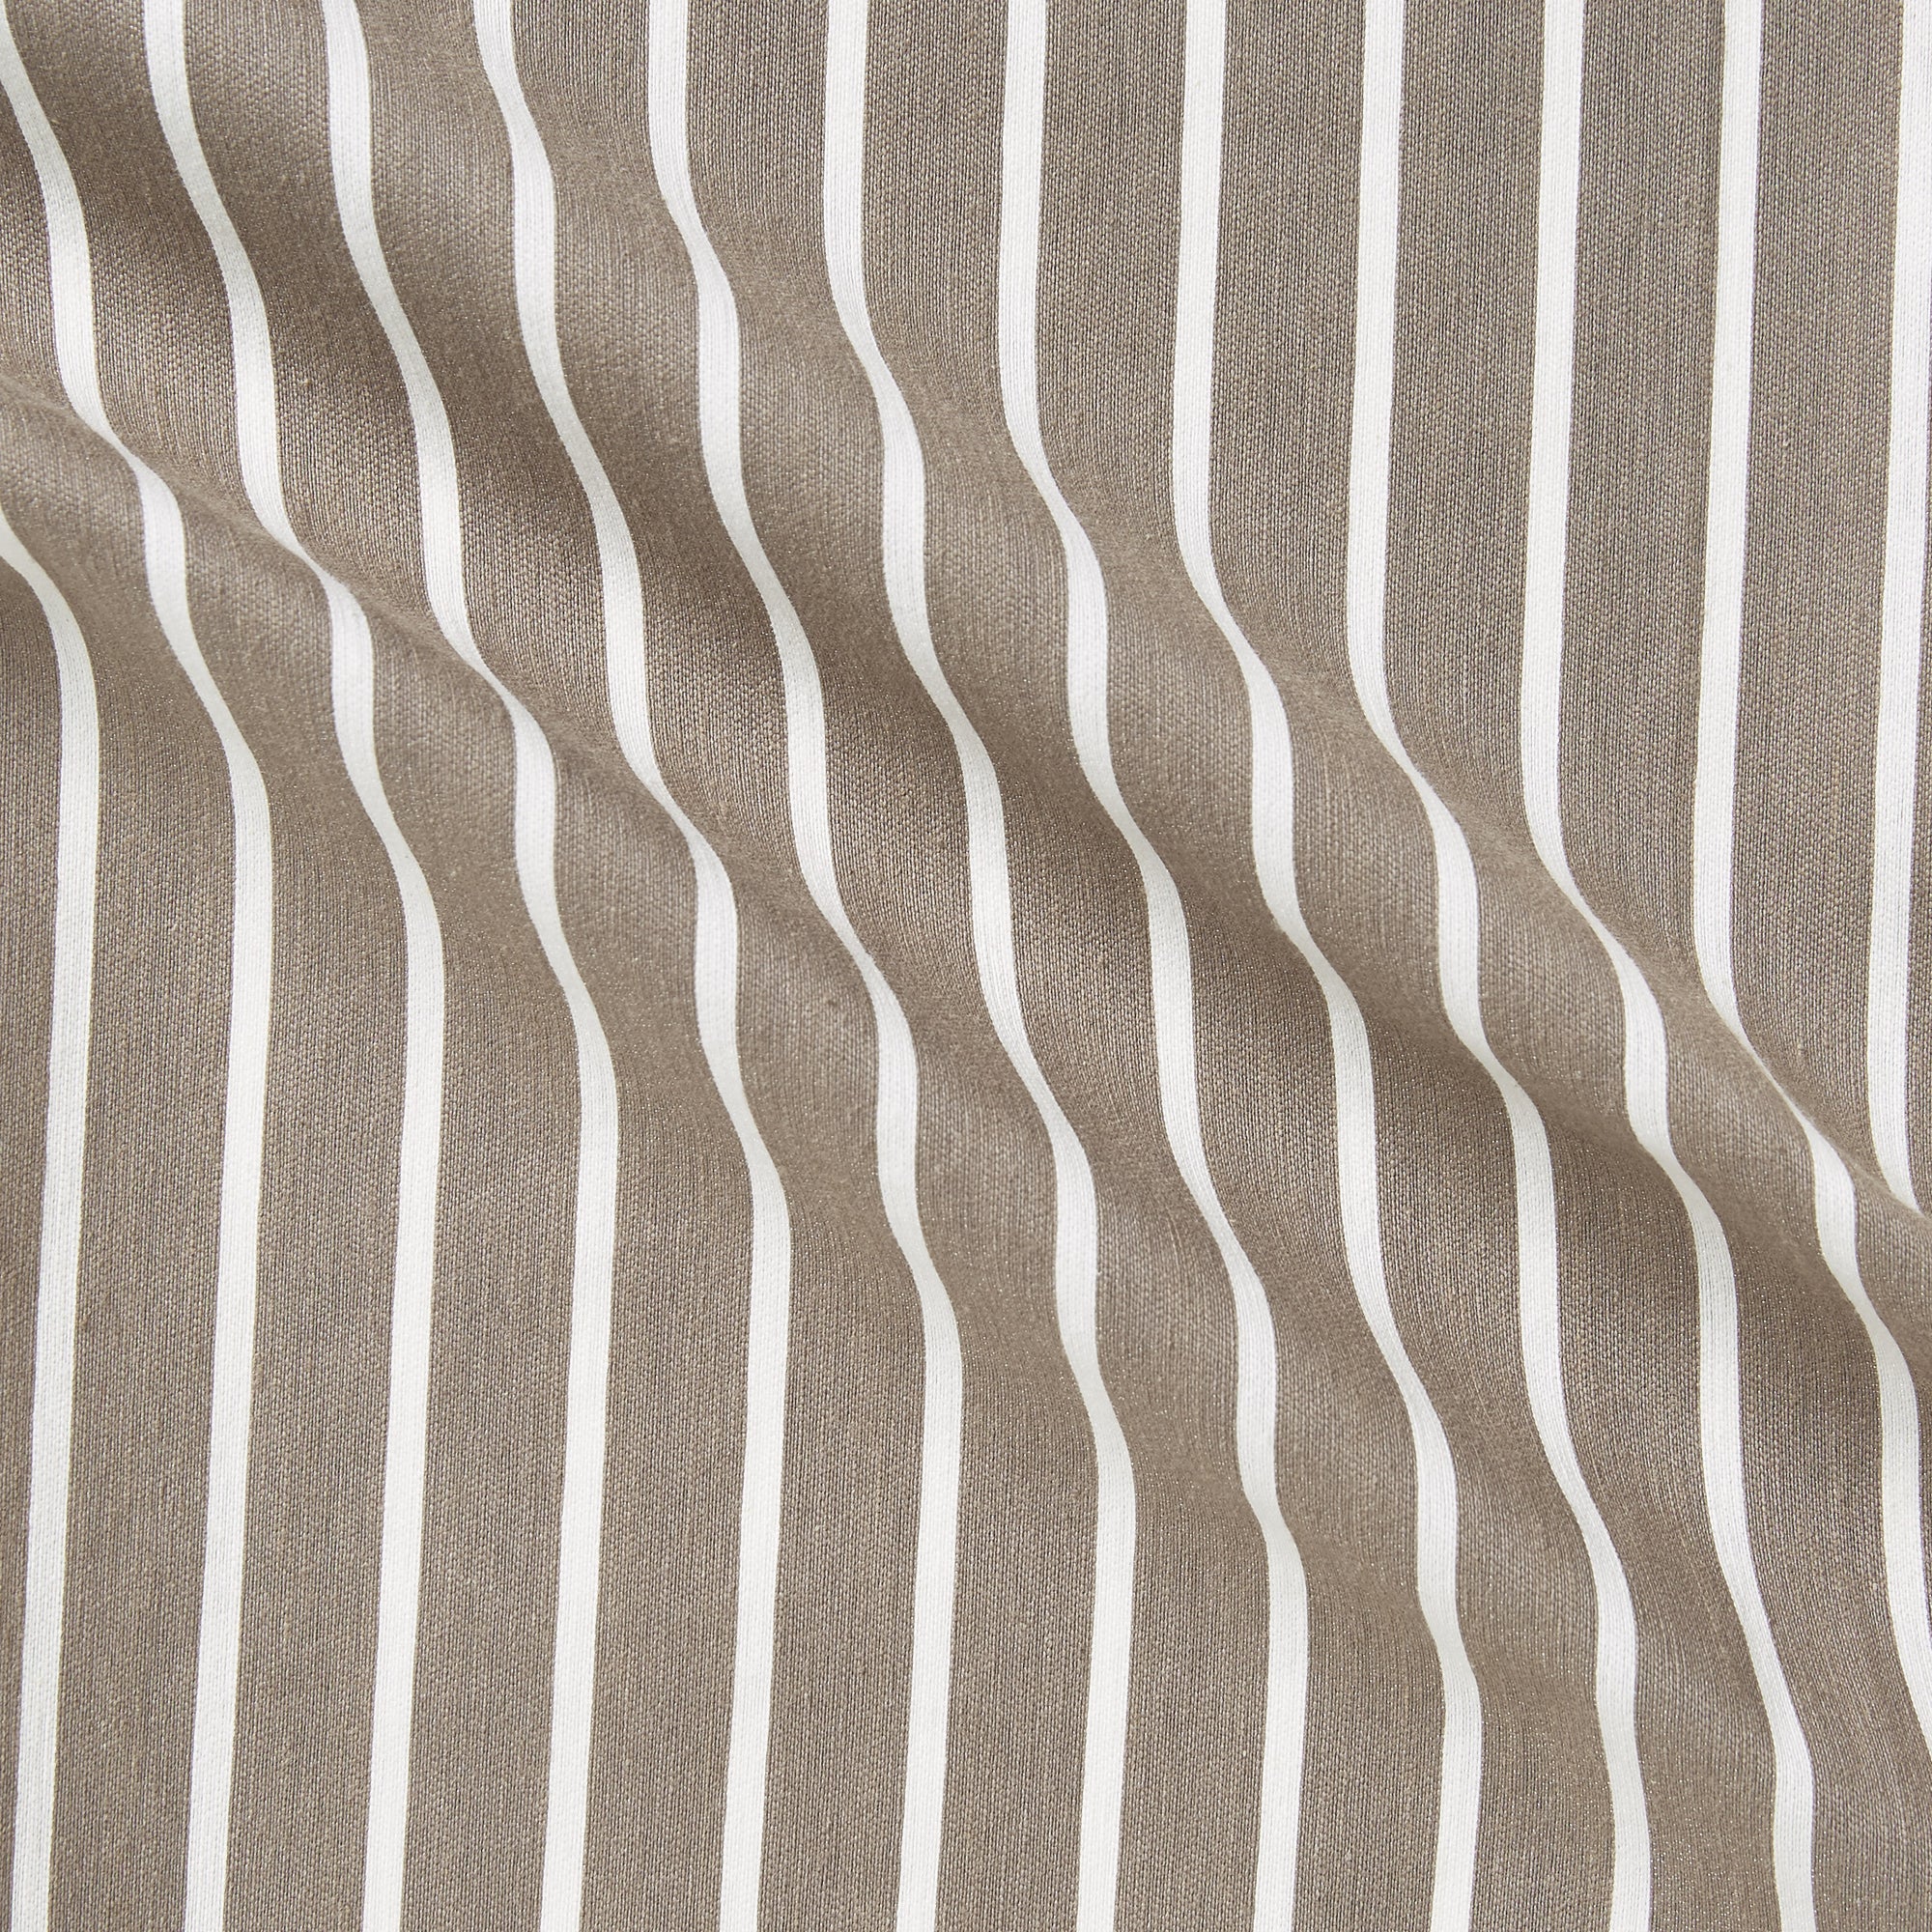 gatsby displaying the mocha color version of a classic  Butchers stripe, heavy weight Cotton and nylon blend featuring moderate drape